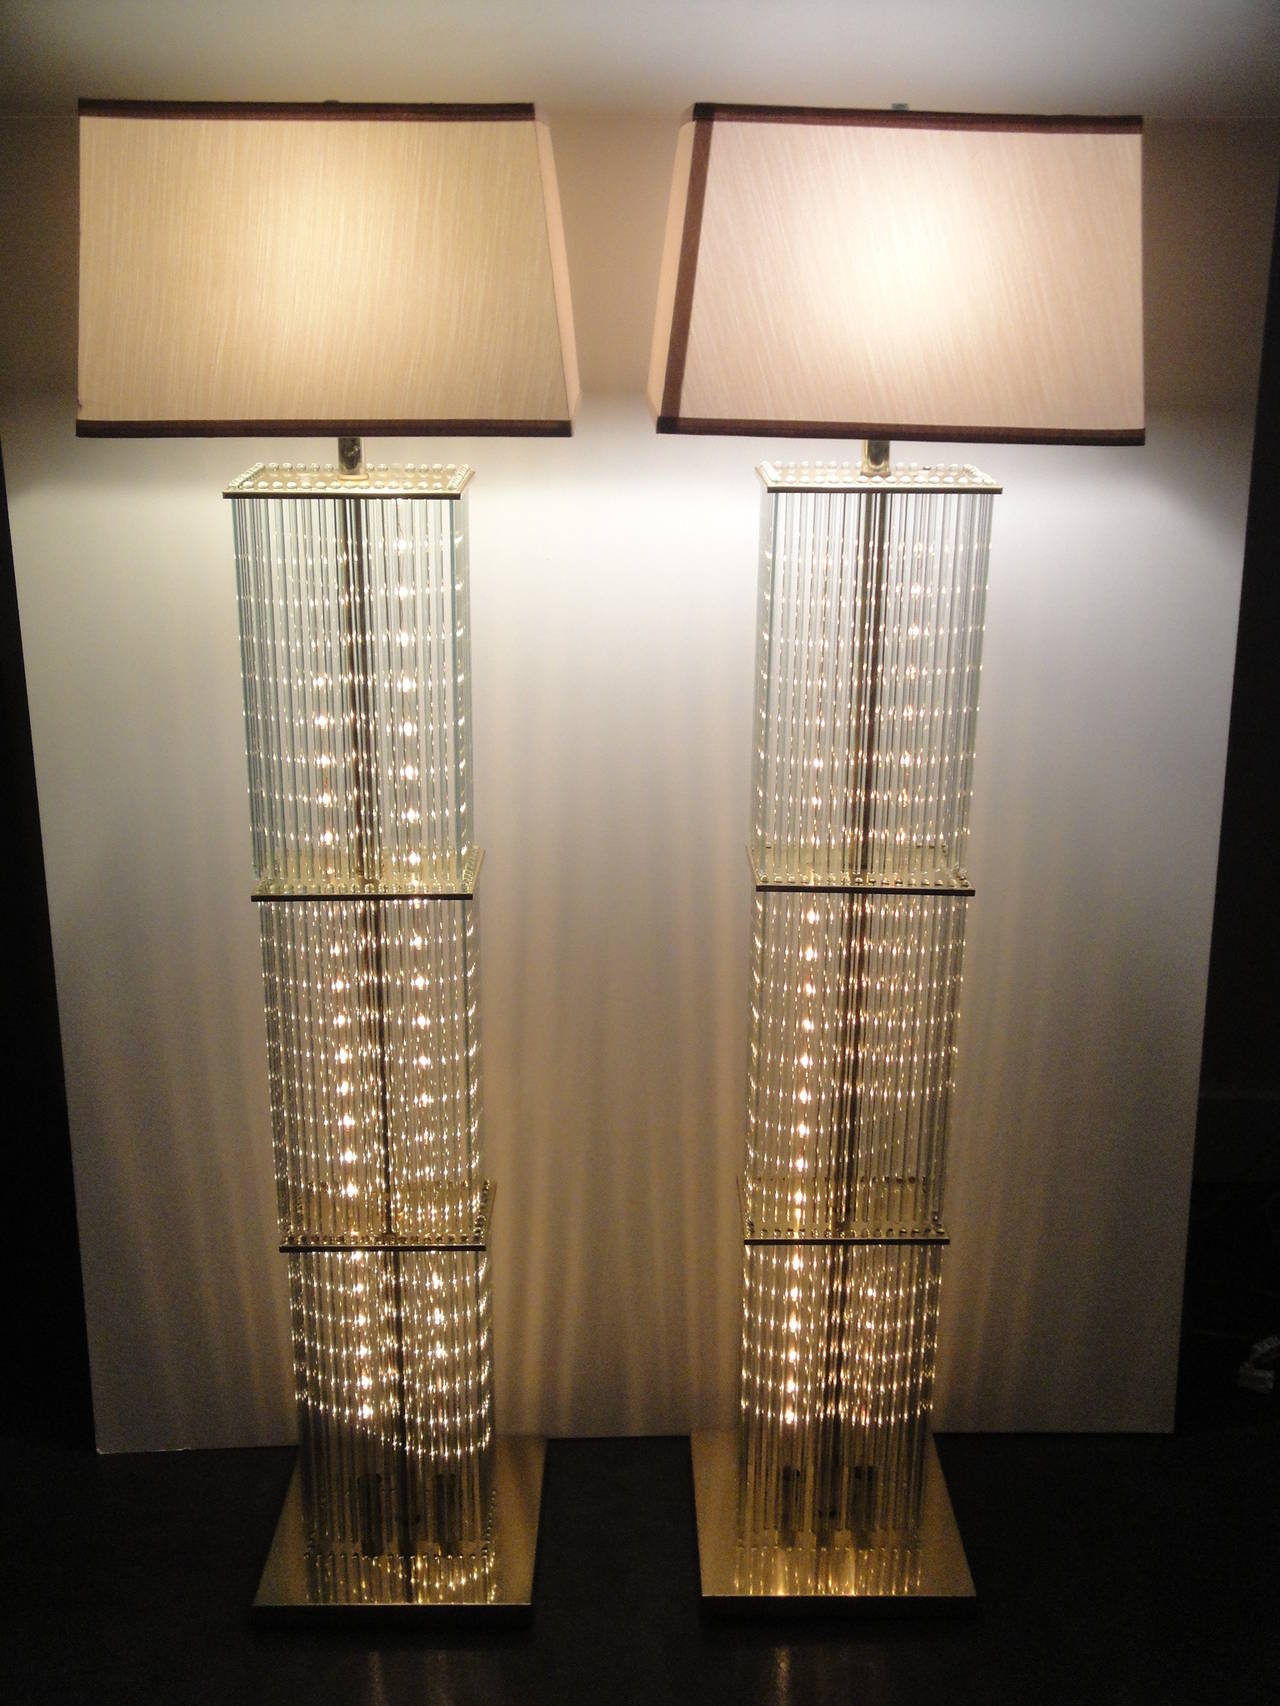 Pair of Sciolari brass and glass rods floor lamps for Lightolier. Original light bulbs have been replaced with new LED pipe bulbs that will last a lifetime.
Shades not included.